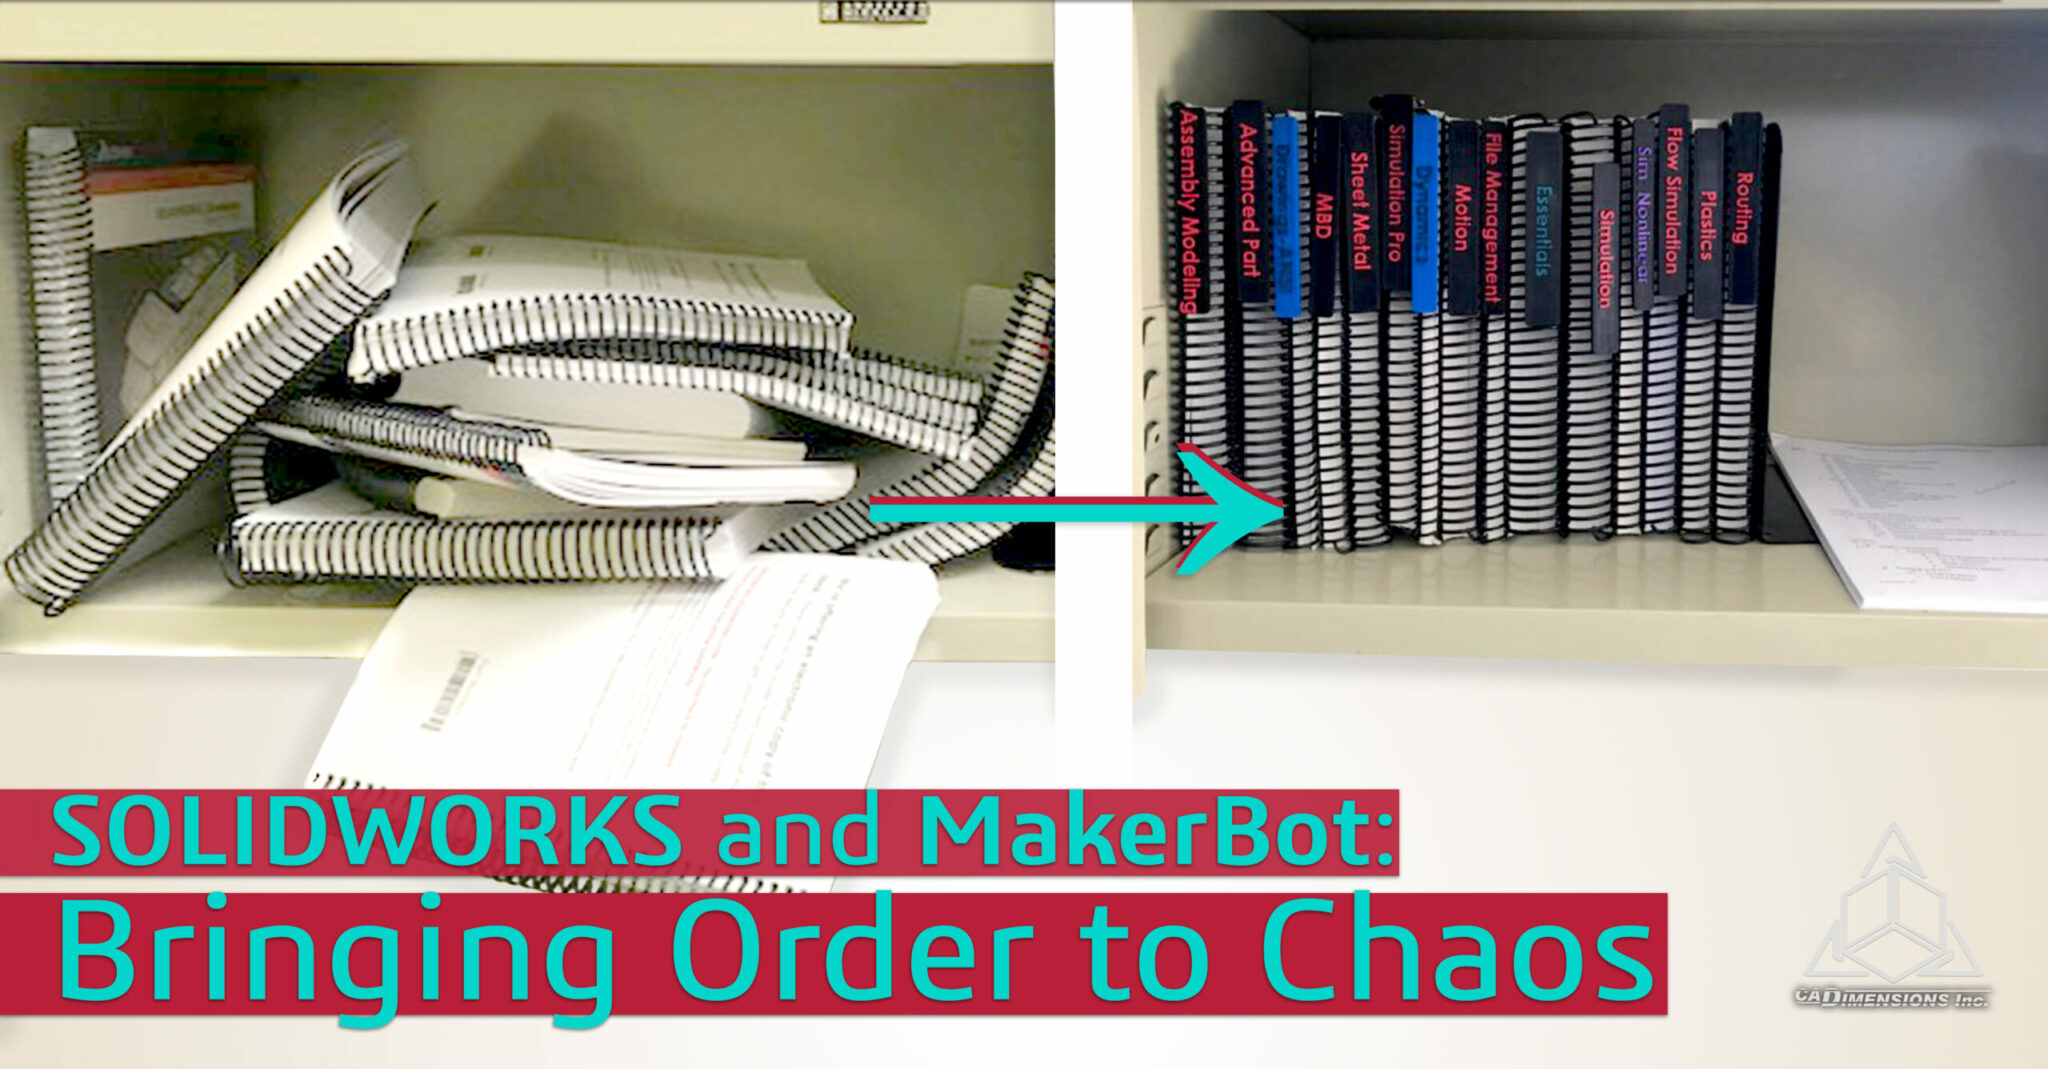 Correcting Chaos with SOLIDWORKS and MakerBot